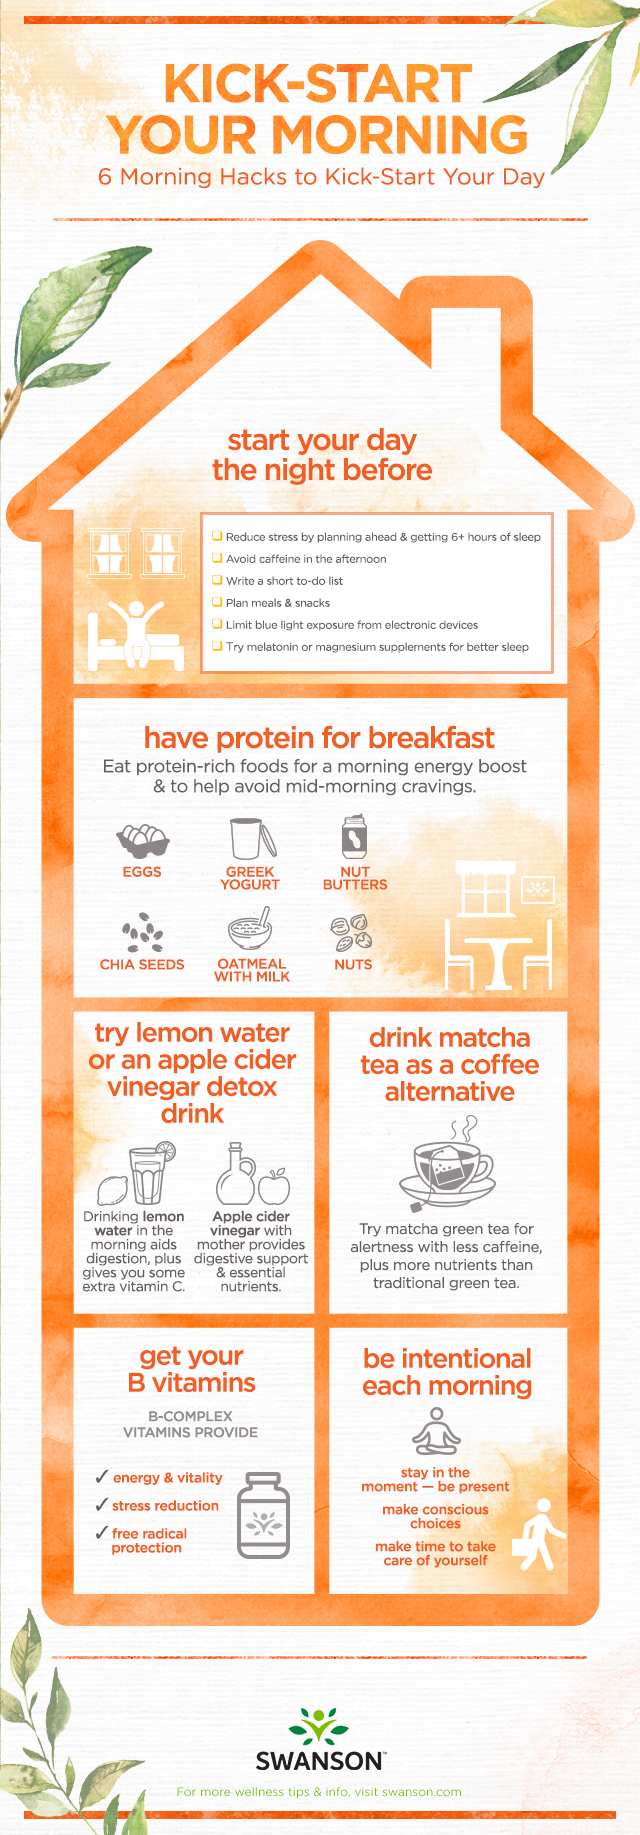 Kick-Start Your Morning - How to Kick-Start Your Morning Infographic by Swanson Health